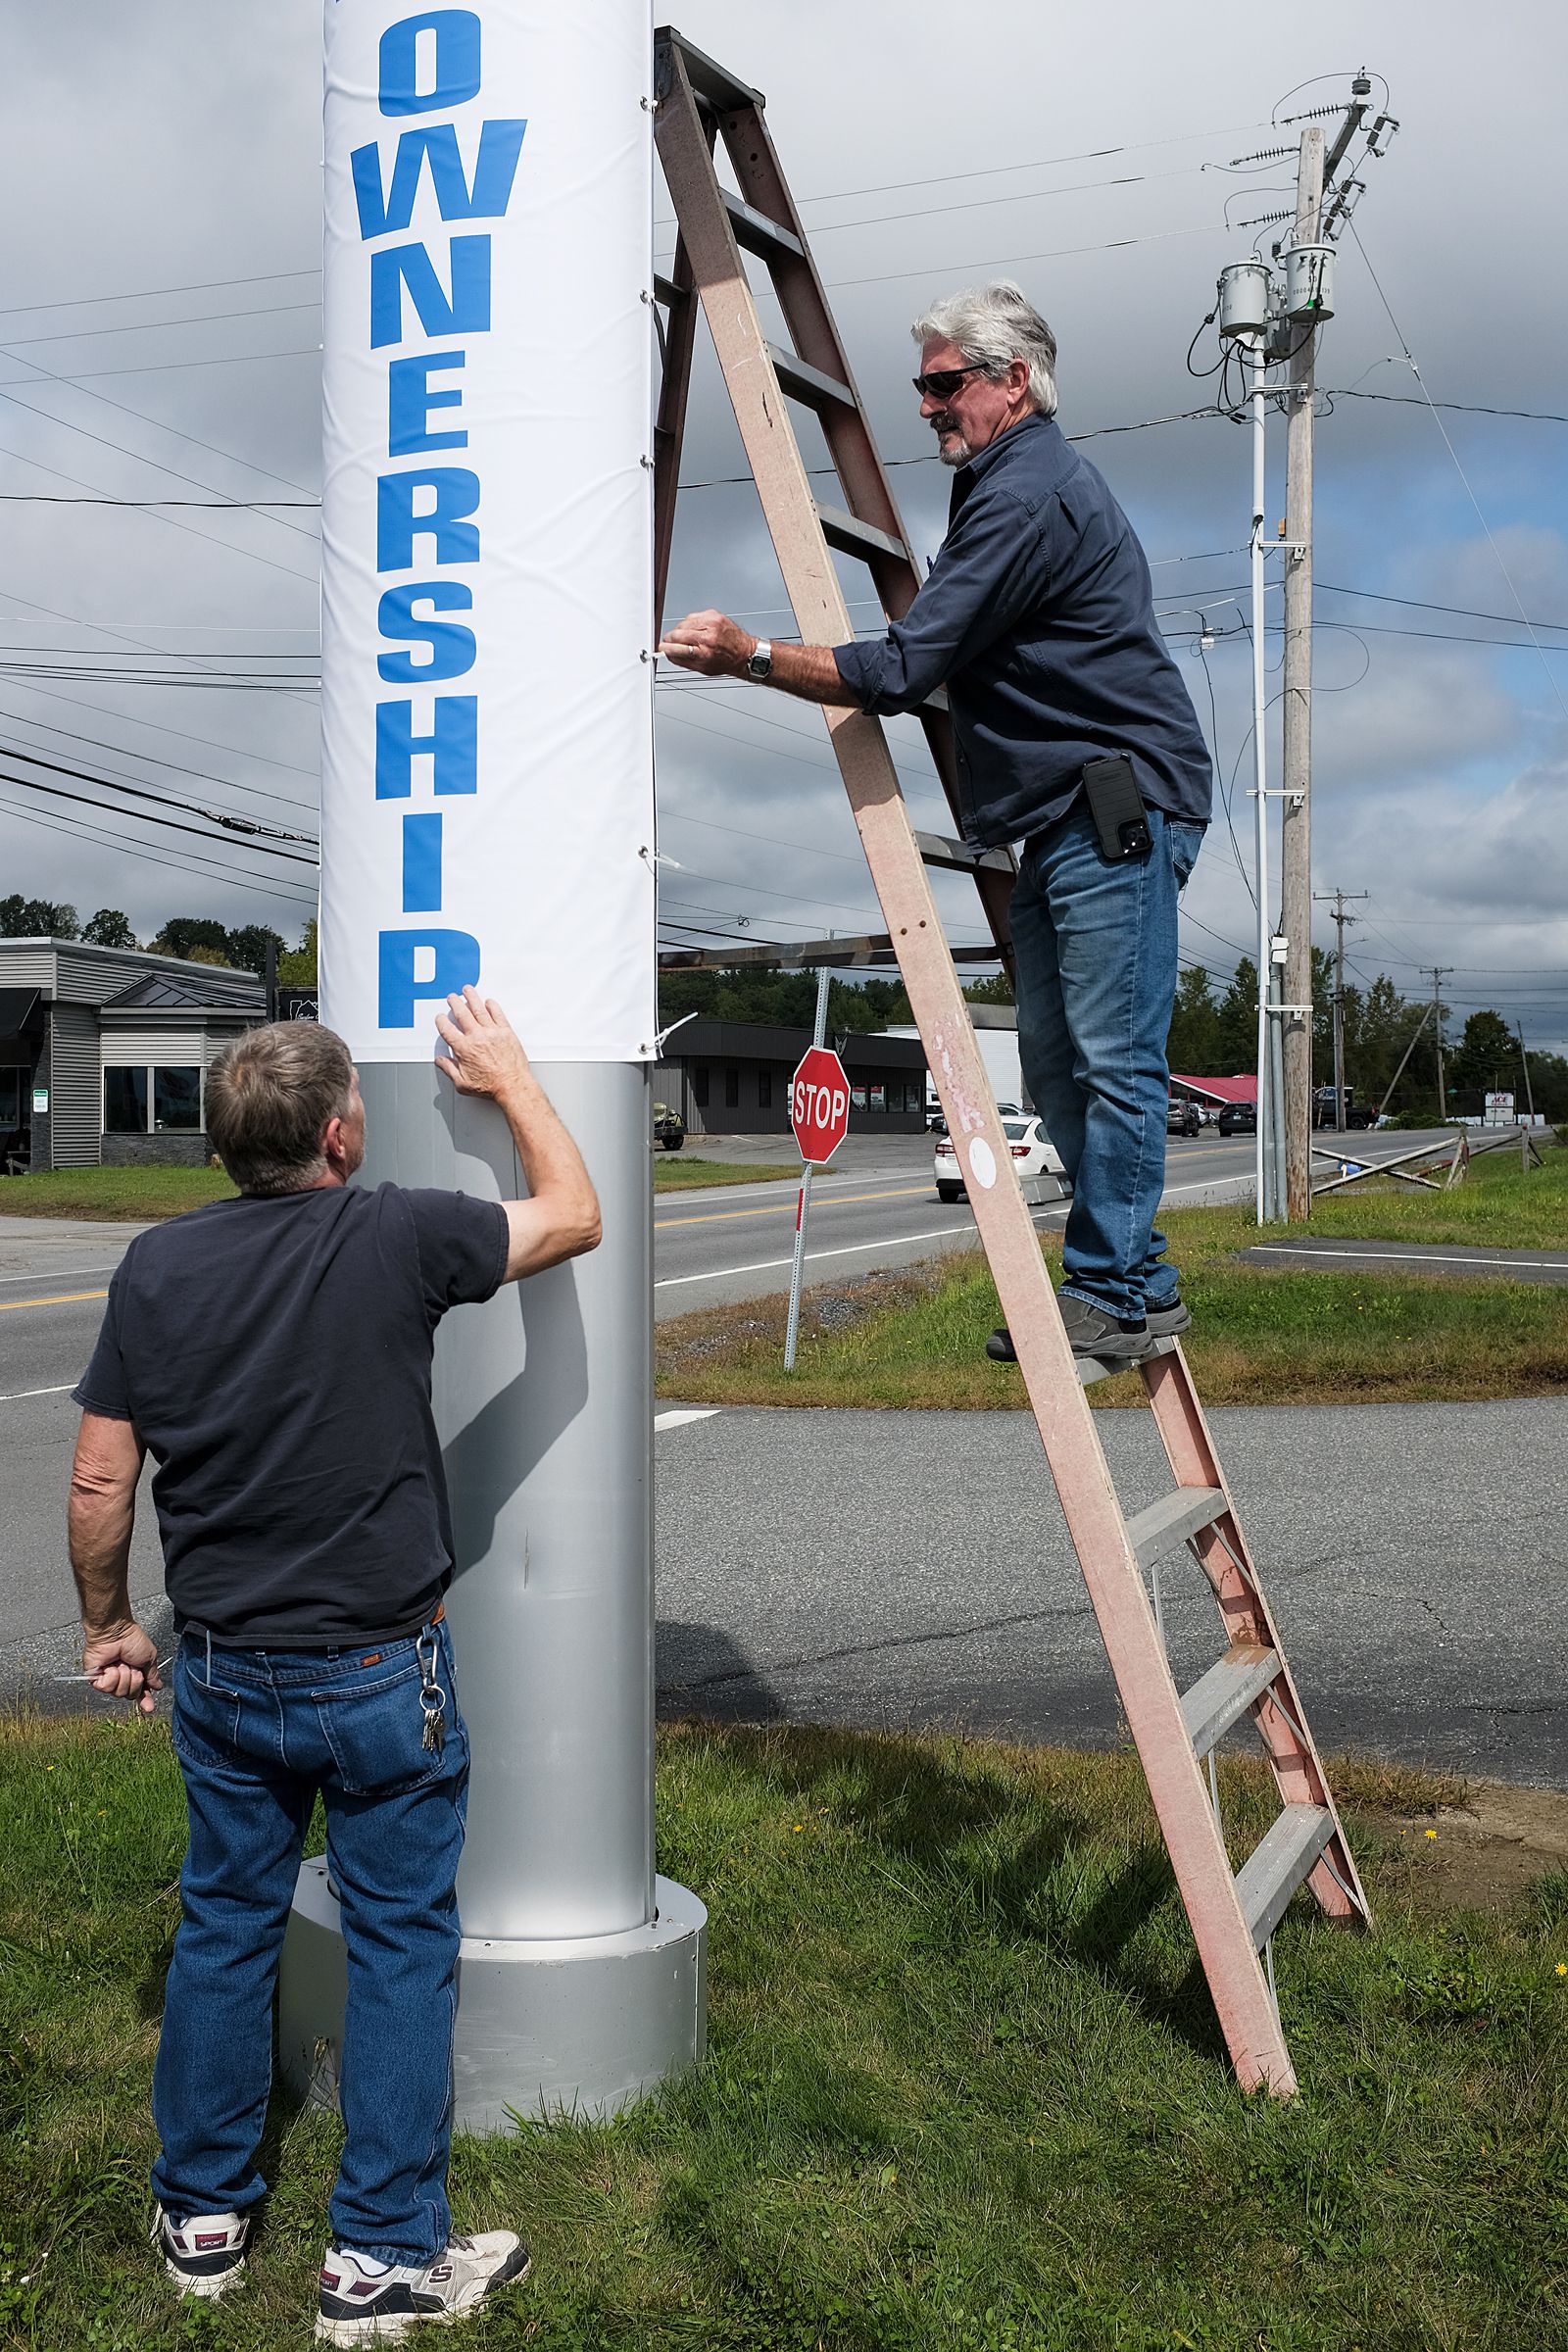 Ray St. Sauveur, of Unique Signs, right, hangs a banner with help from friend Gary Pellerin, left, at a Claremont, N.H., car dealership on Tuesday, Sept. 20, 2022. “Banners are just banners,” said St. Sauveur, who has been building, printing, welding, wiring and maintaining signs for 47 years. “Anybody can do banners.” (Valley News - James M. Patterson) Copyright Valley News. May not be reprinted or used online without permission. Send requests to permission@vnews.com.